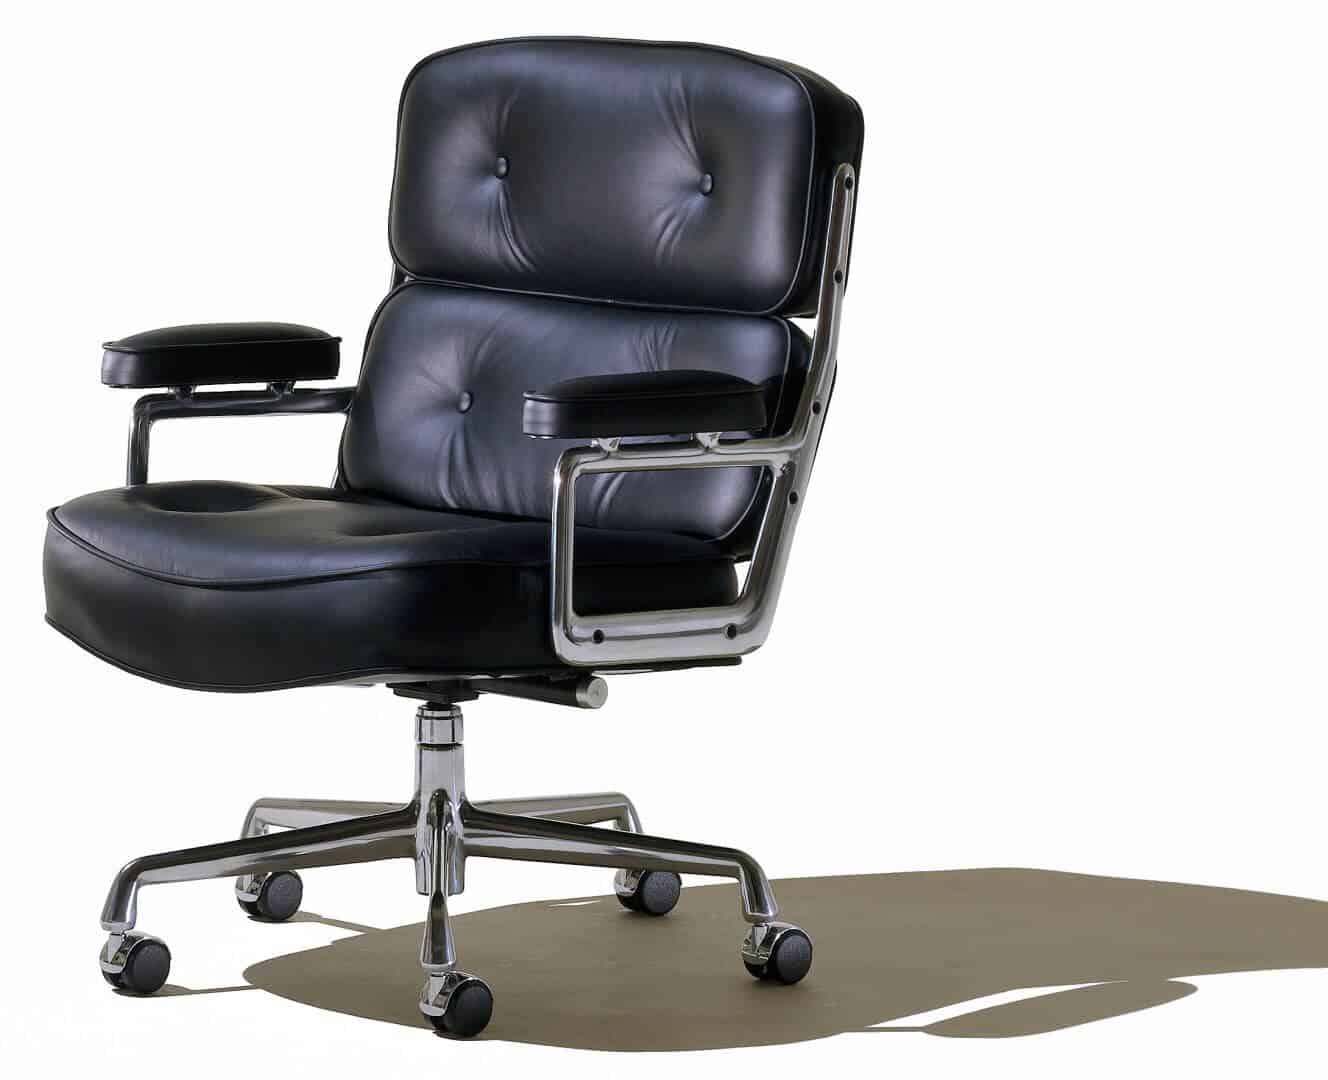 Office Chair Guide How To Buy A Desk Chair Top 10 Chairs